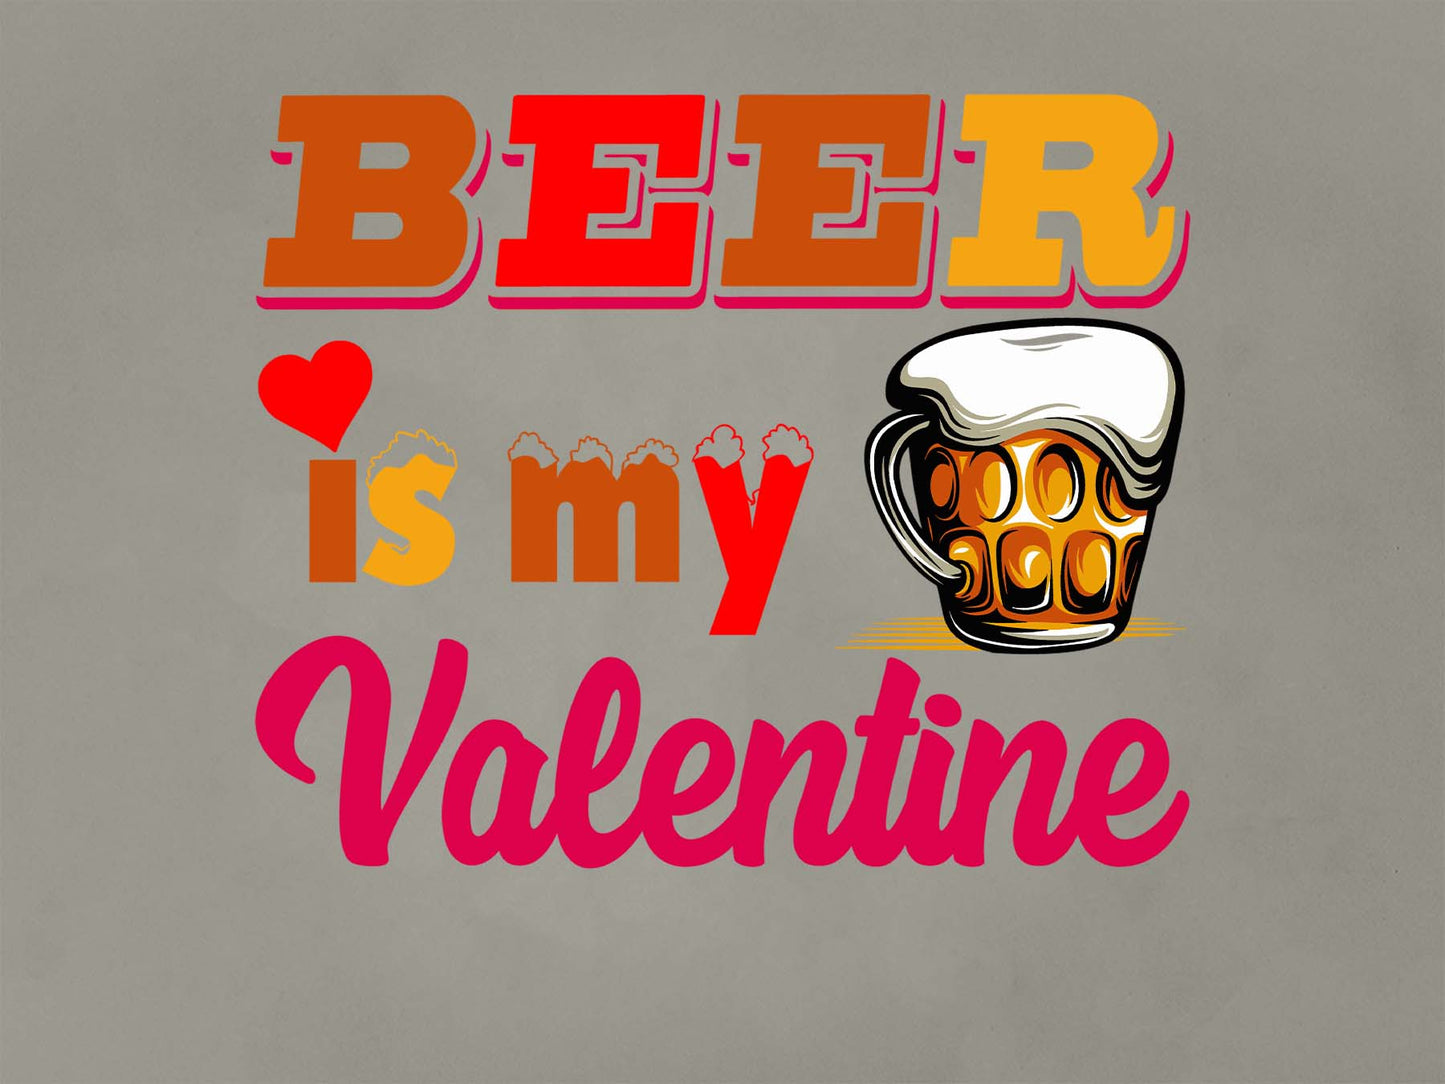 Fat Dave Beer is my Valentine